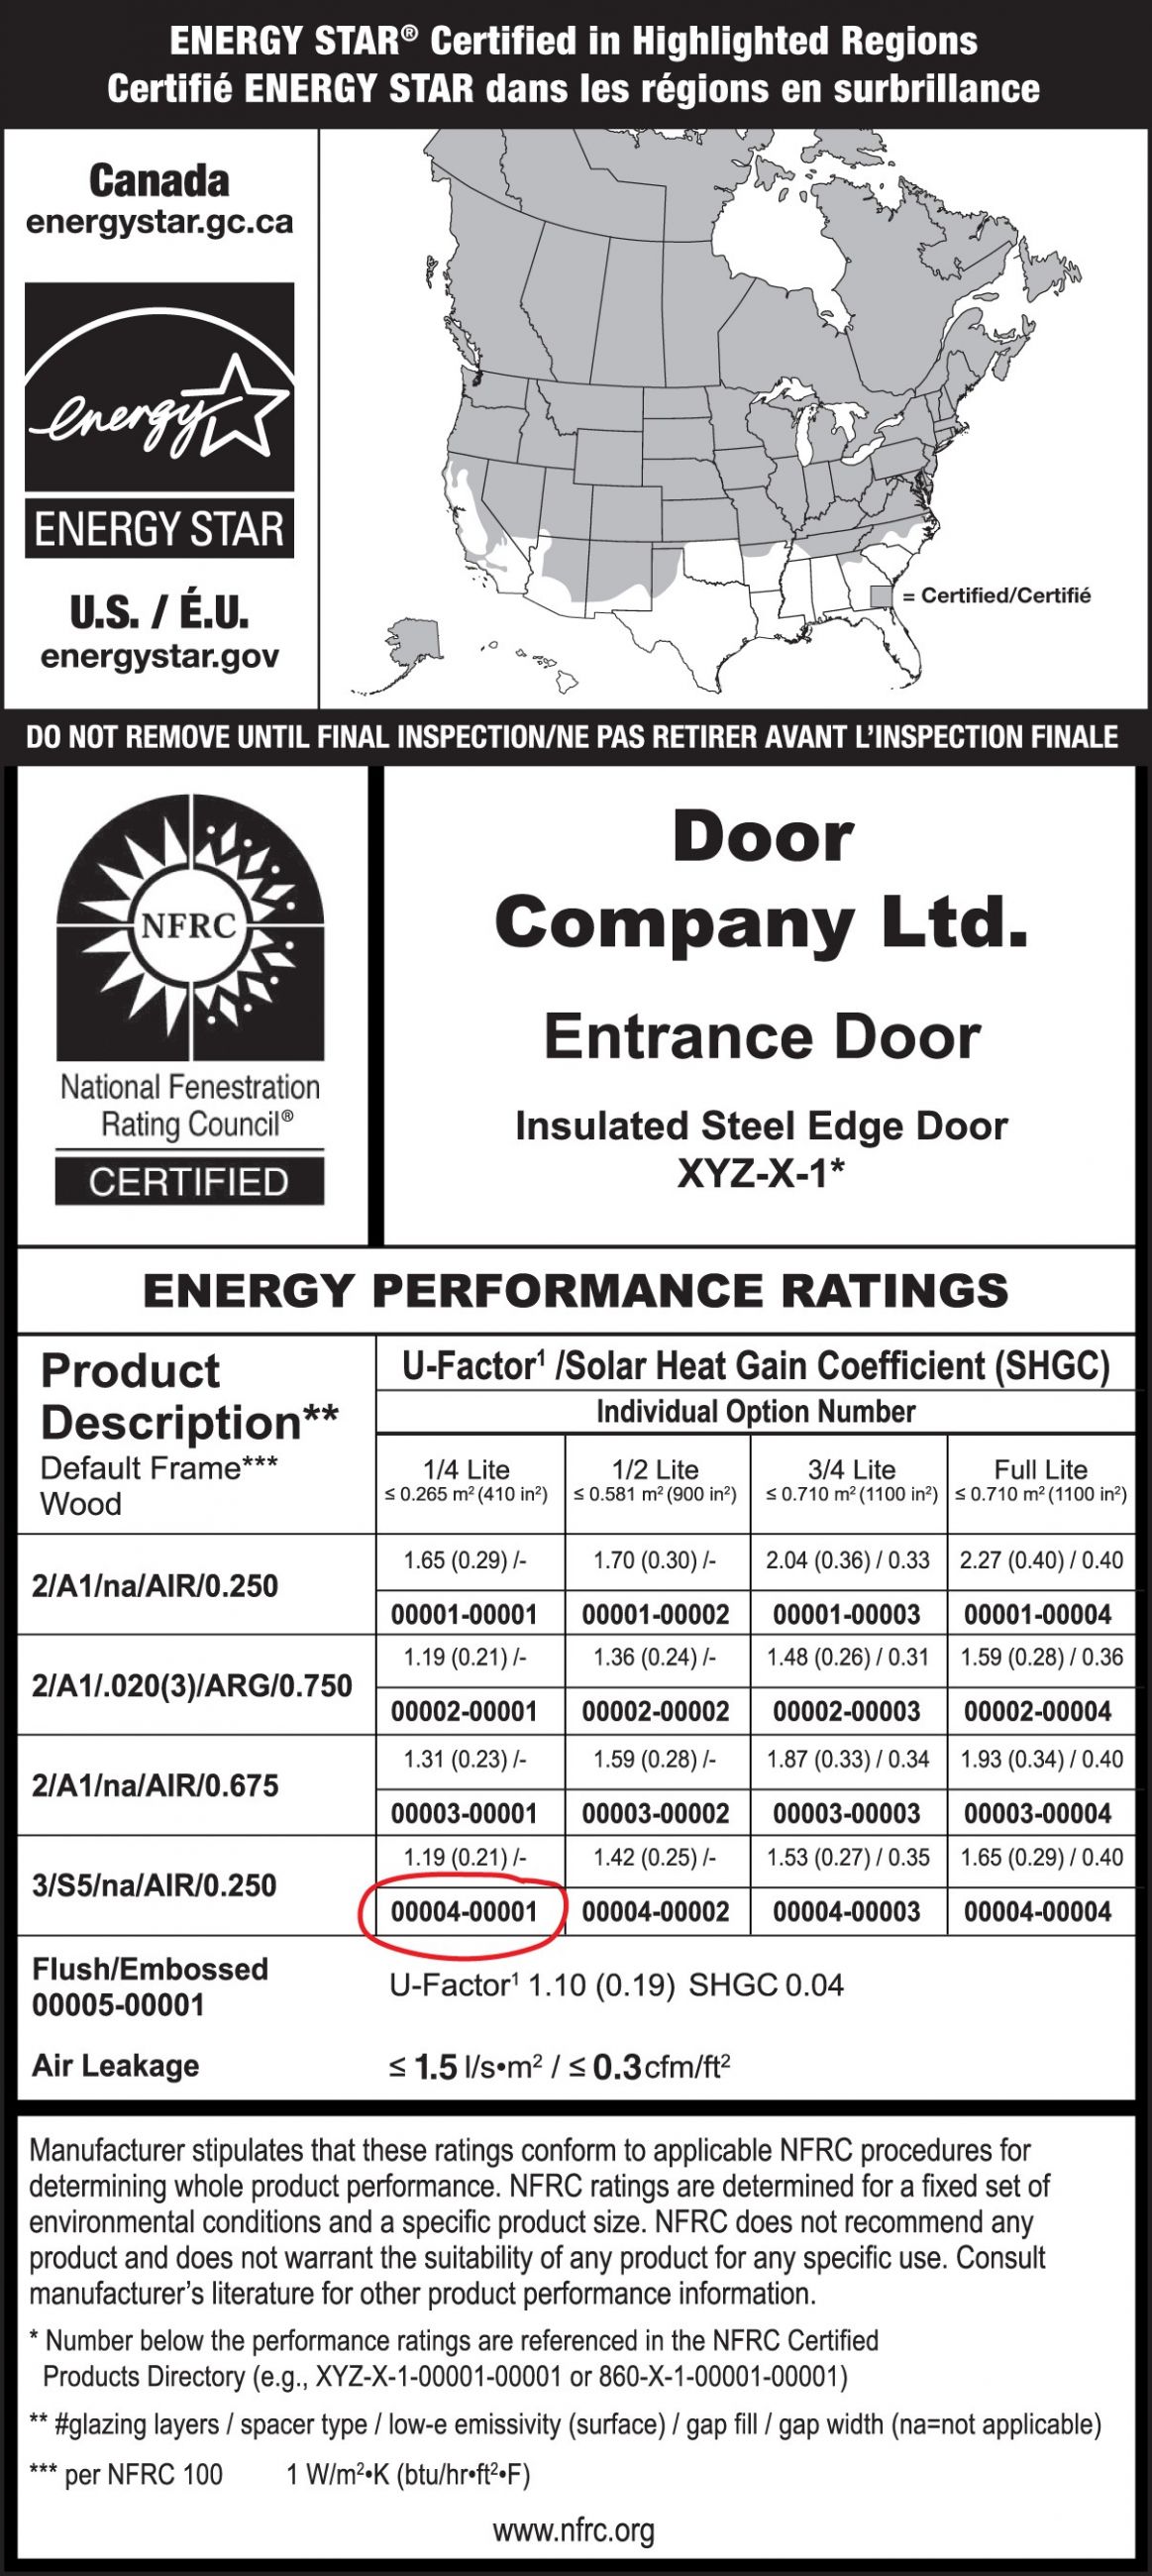 Sample ENERGY STAR / NFRC temporary label for a hinged door. The ENERGY STAR portion has an ENERGY STAR certification mark and a map of Canada / U.S.A. indicating that the product is certified for all of Canada and the Northern and North-Central zones in the U.S.A. The NFRC portion has a NFRC certification mark, brand name, product line code and the product’s specific performance ratings for each glazing option.